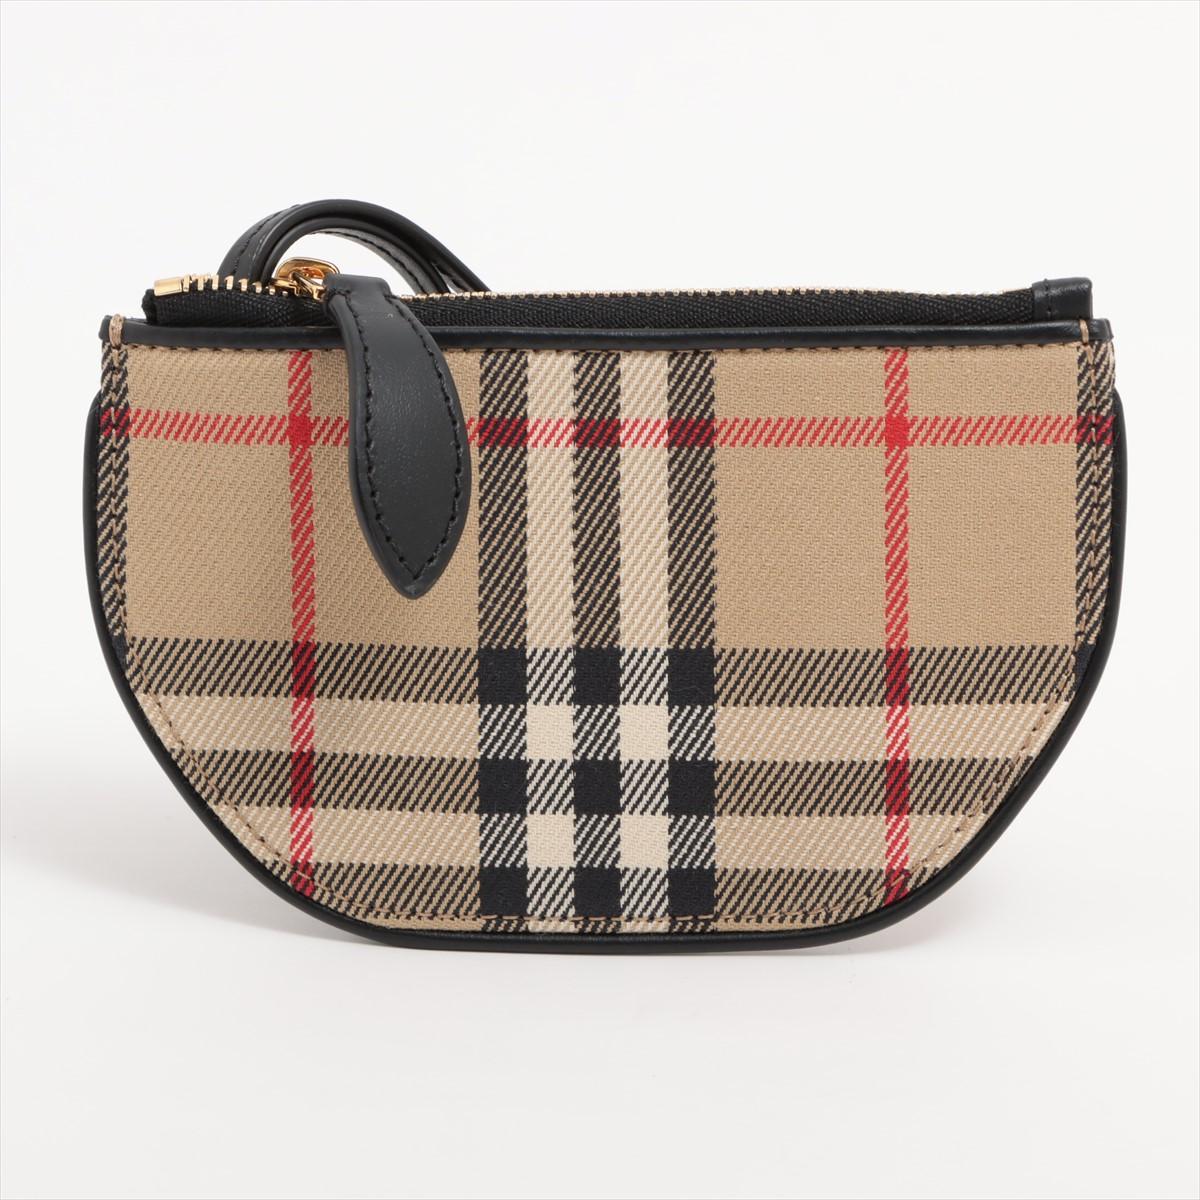 The Burberry Nova Check Coin Purse in Beige combines classic elegance with practical functionality. Crafted from Burberry's iconic Nova Check canvas, the coin purse features the brand's distinctive beige check pattern, offering a timeless aesthetic.